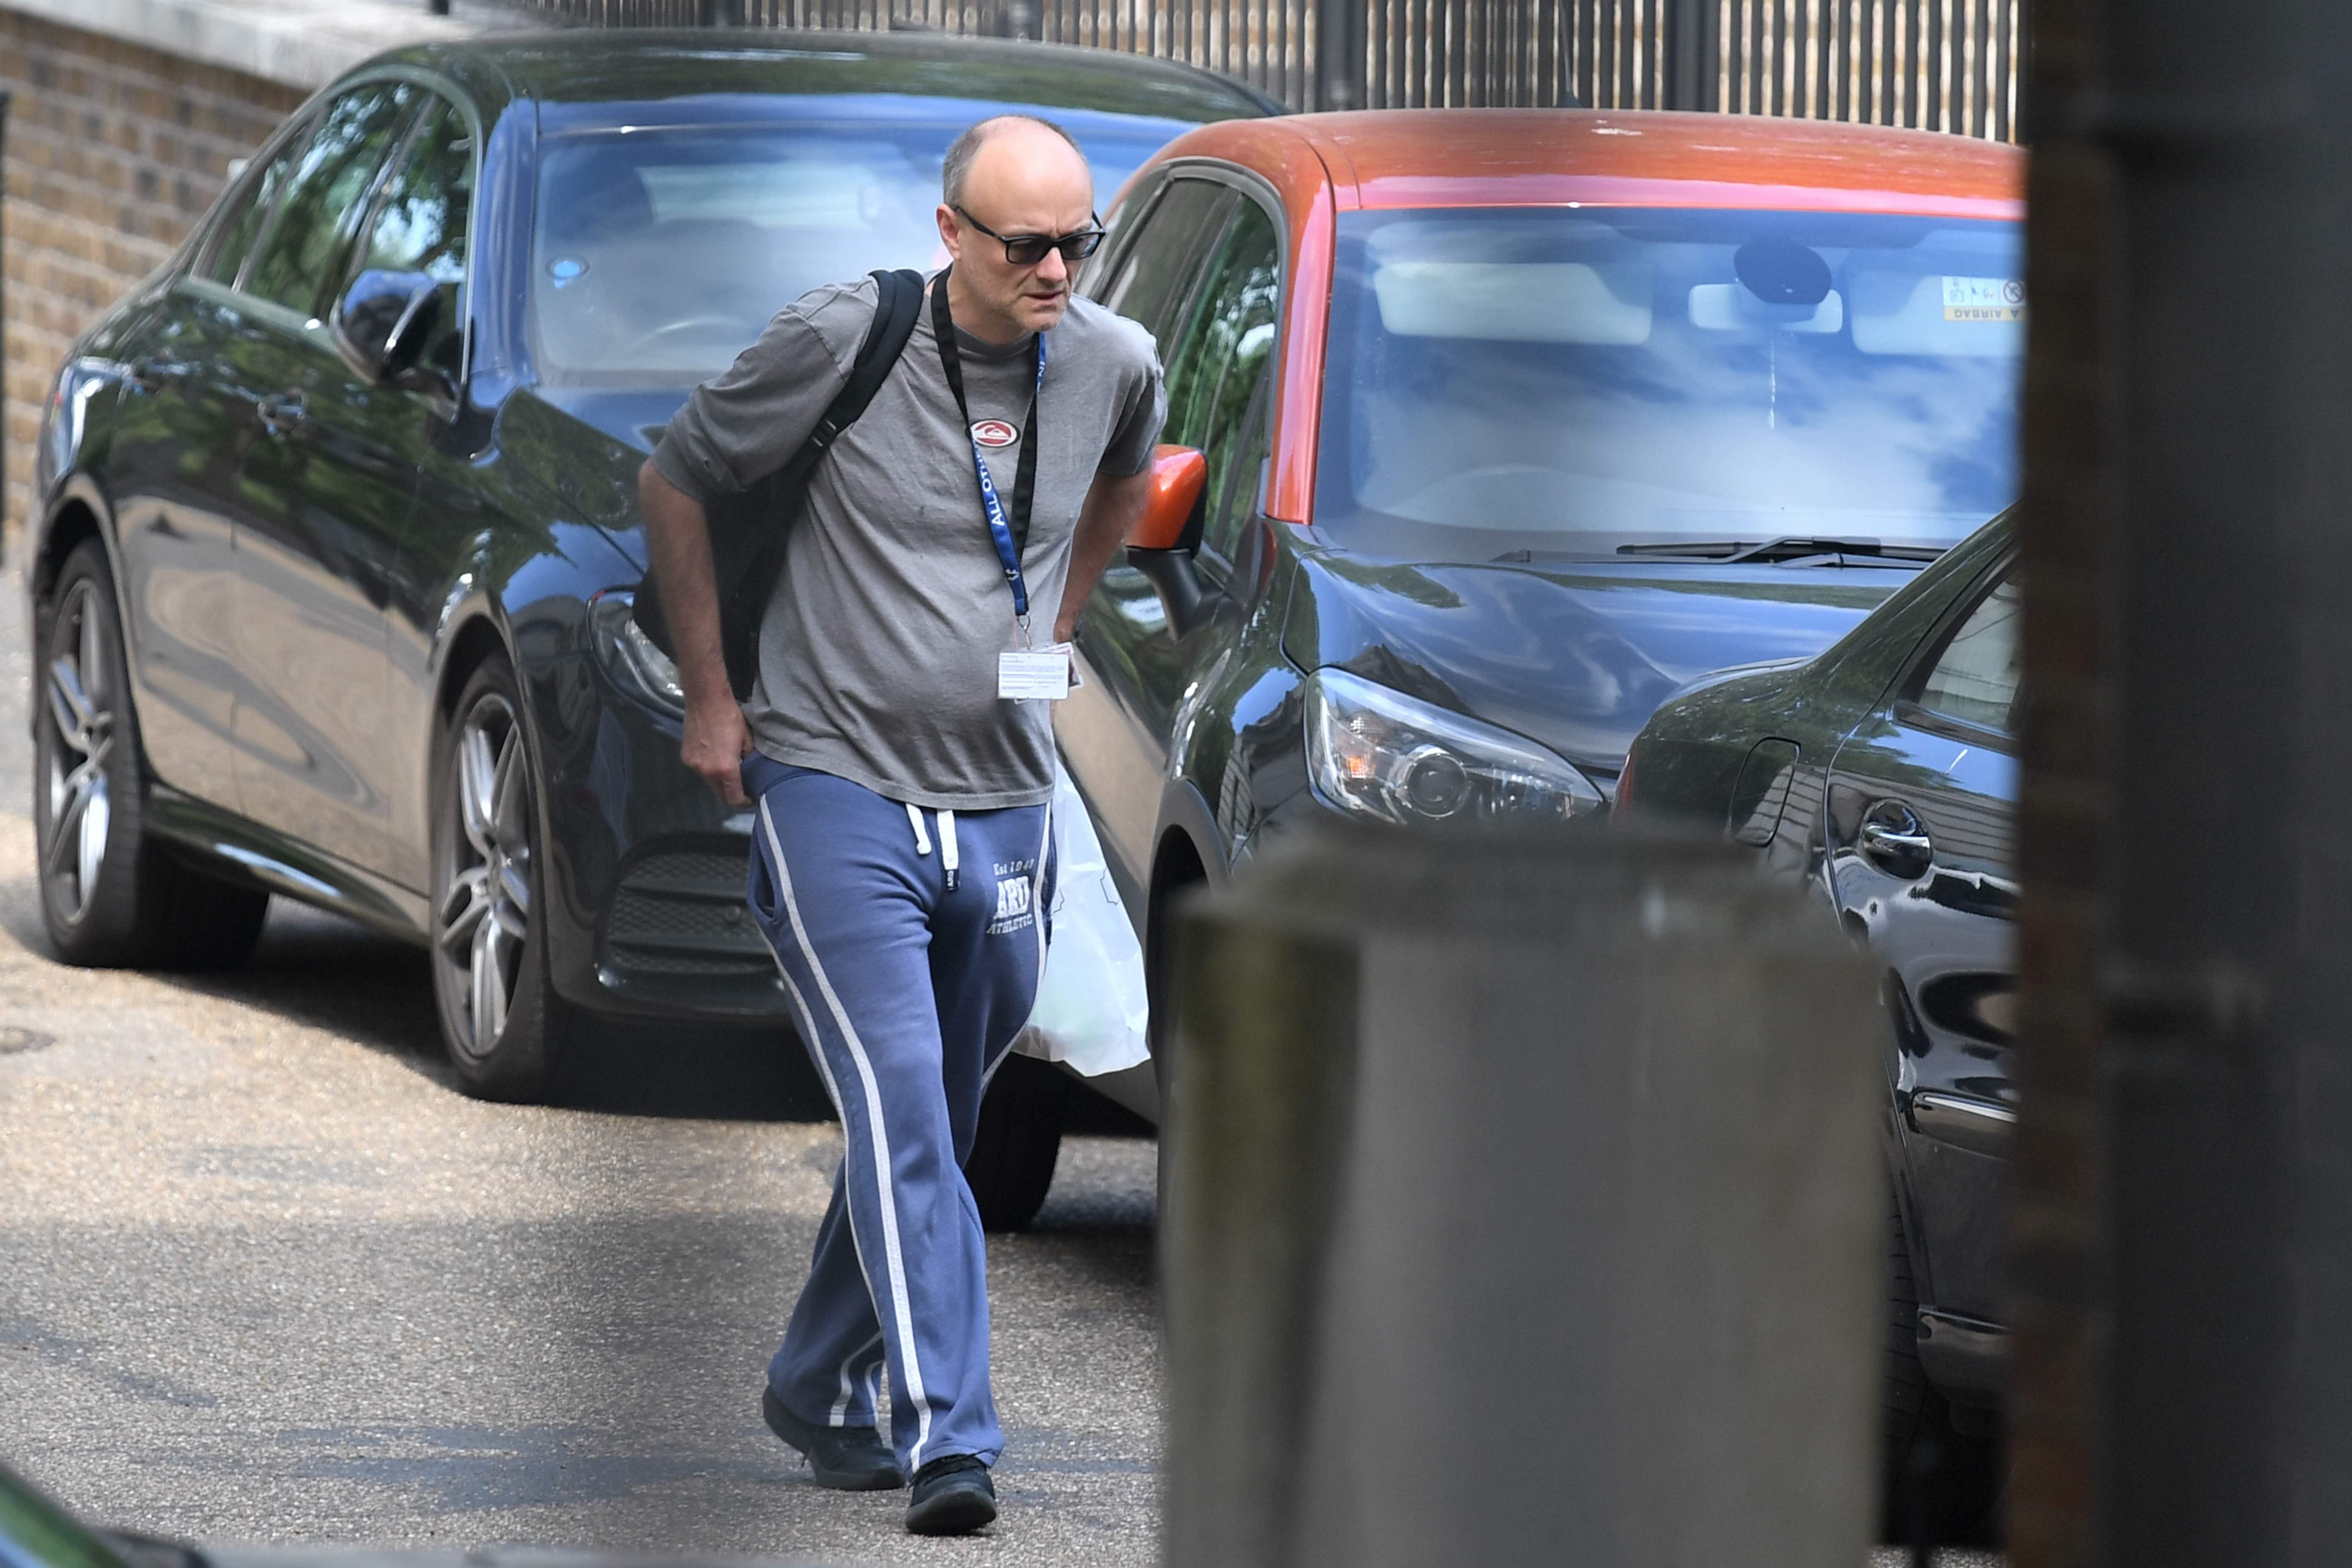 One of British Prime Minister Boris Johnson's top advisers, Dominic Cummings, drew police attention after allegedly breaking the coronavirus lockdown, reports said on May 22. Cummings left his London home to stay with his parents in Durham, northeast England, while suffering symptoms of COVID-19. (AFP photo)